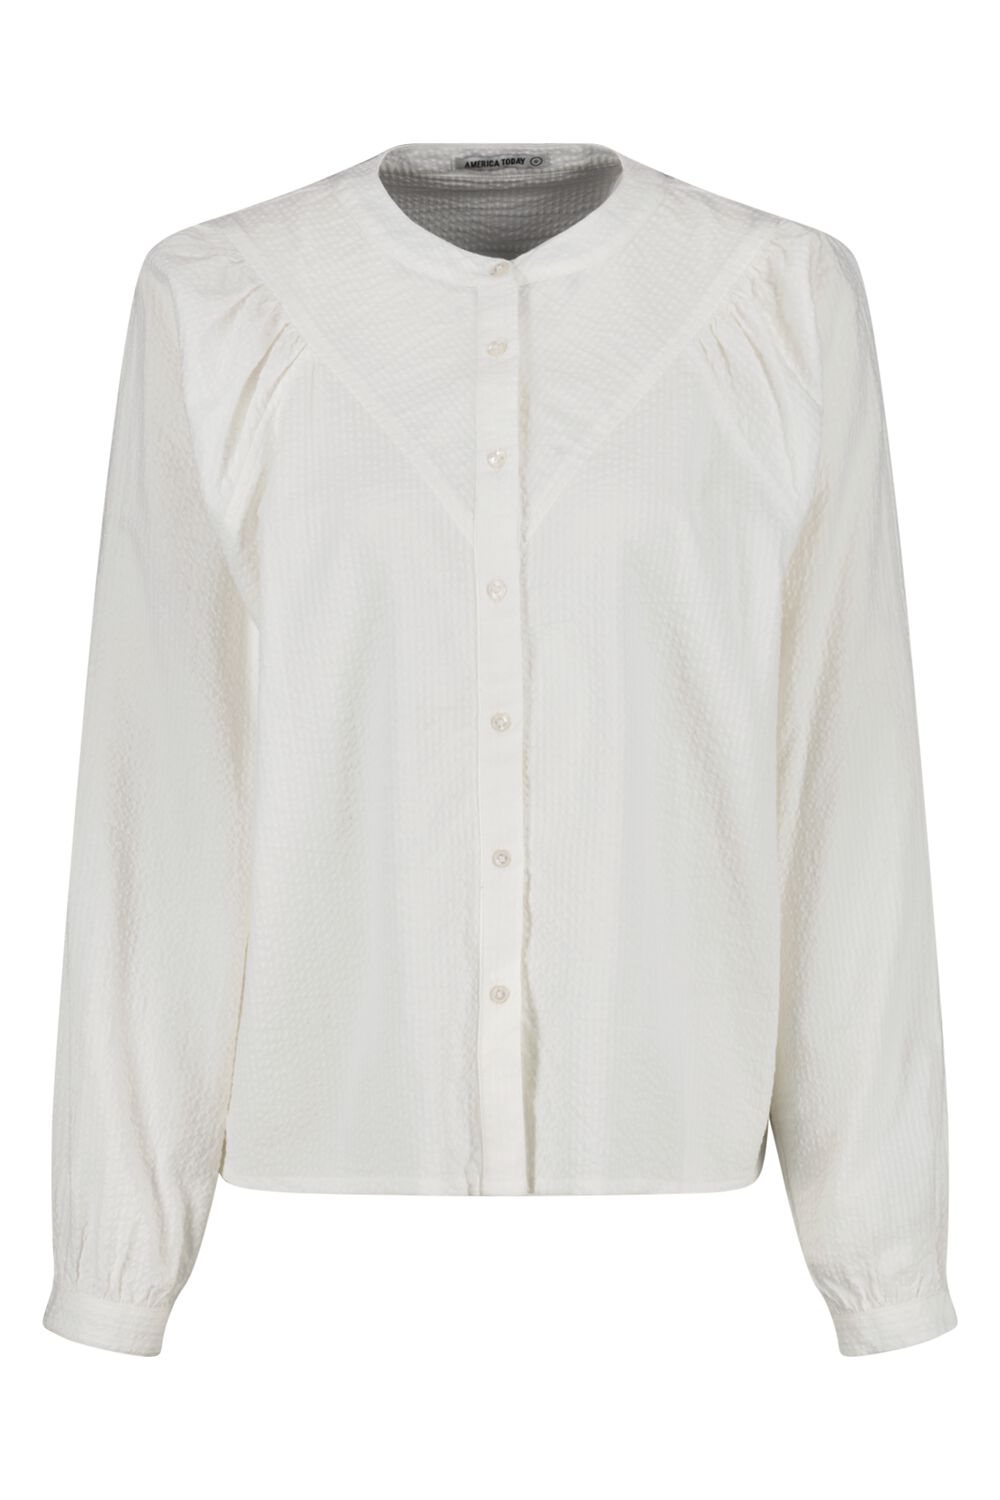 America Today Dames Blouse Britta Wit